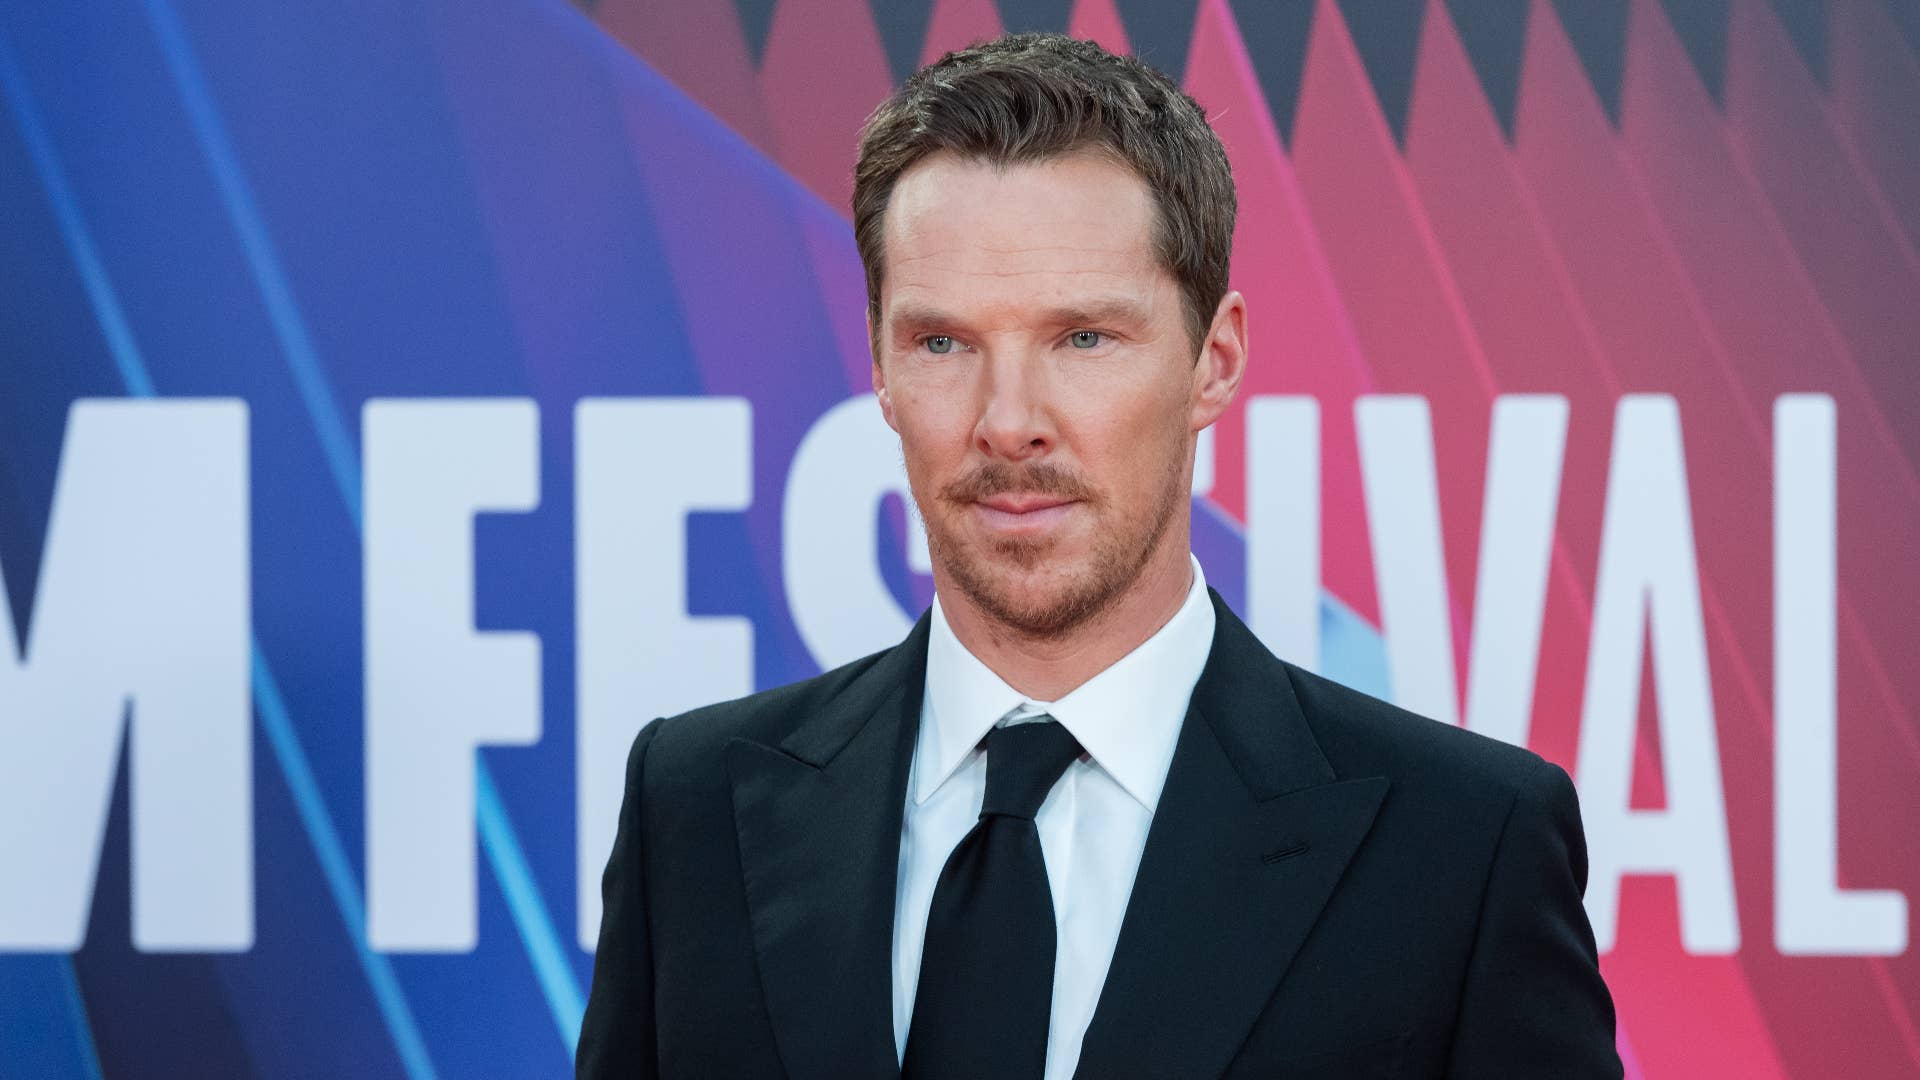 Benedict Cumberbatch attends 'The Power of the Dog' premiere.